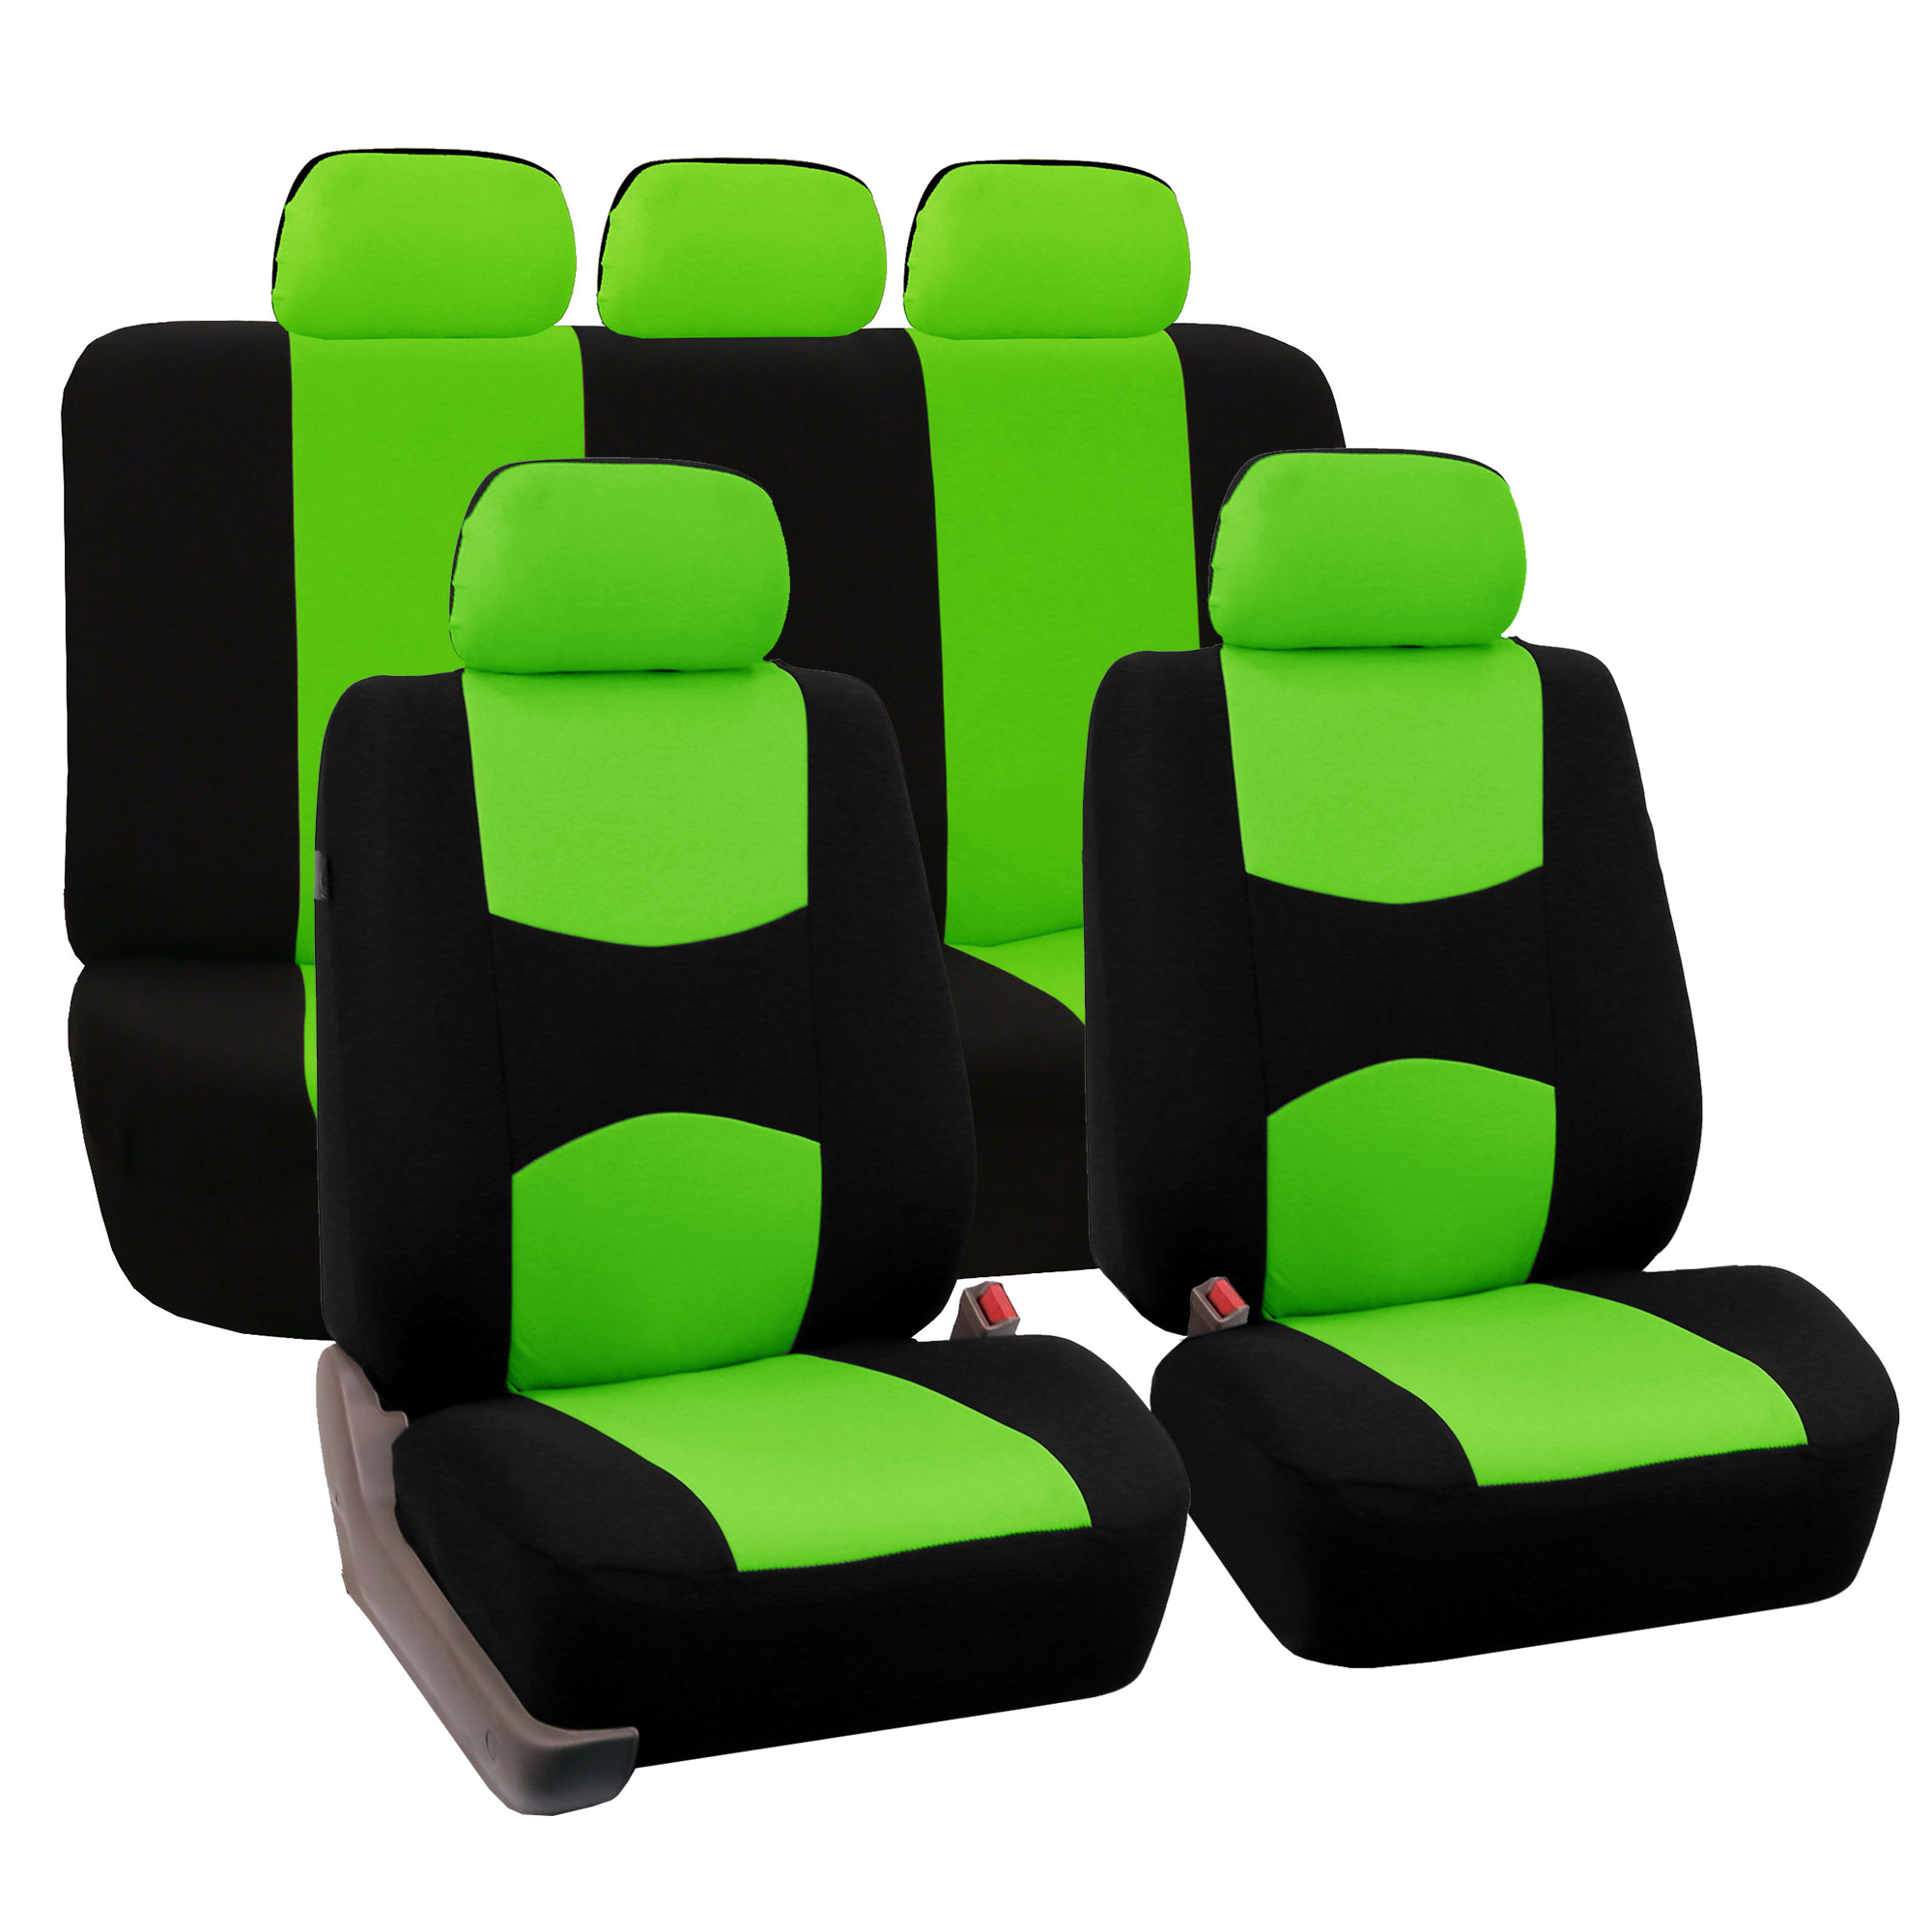 FH Group Universal Flat Cloth Fabric 5 Headrests Full Set Car Seat Cover, Green and Black - image 1 of 2